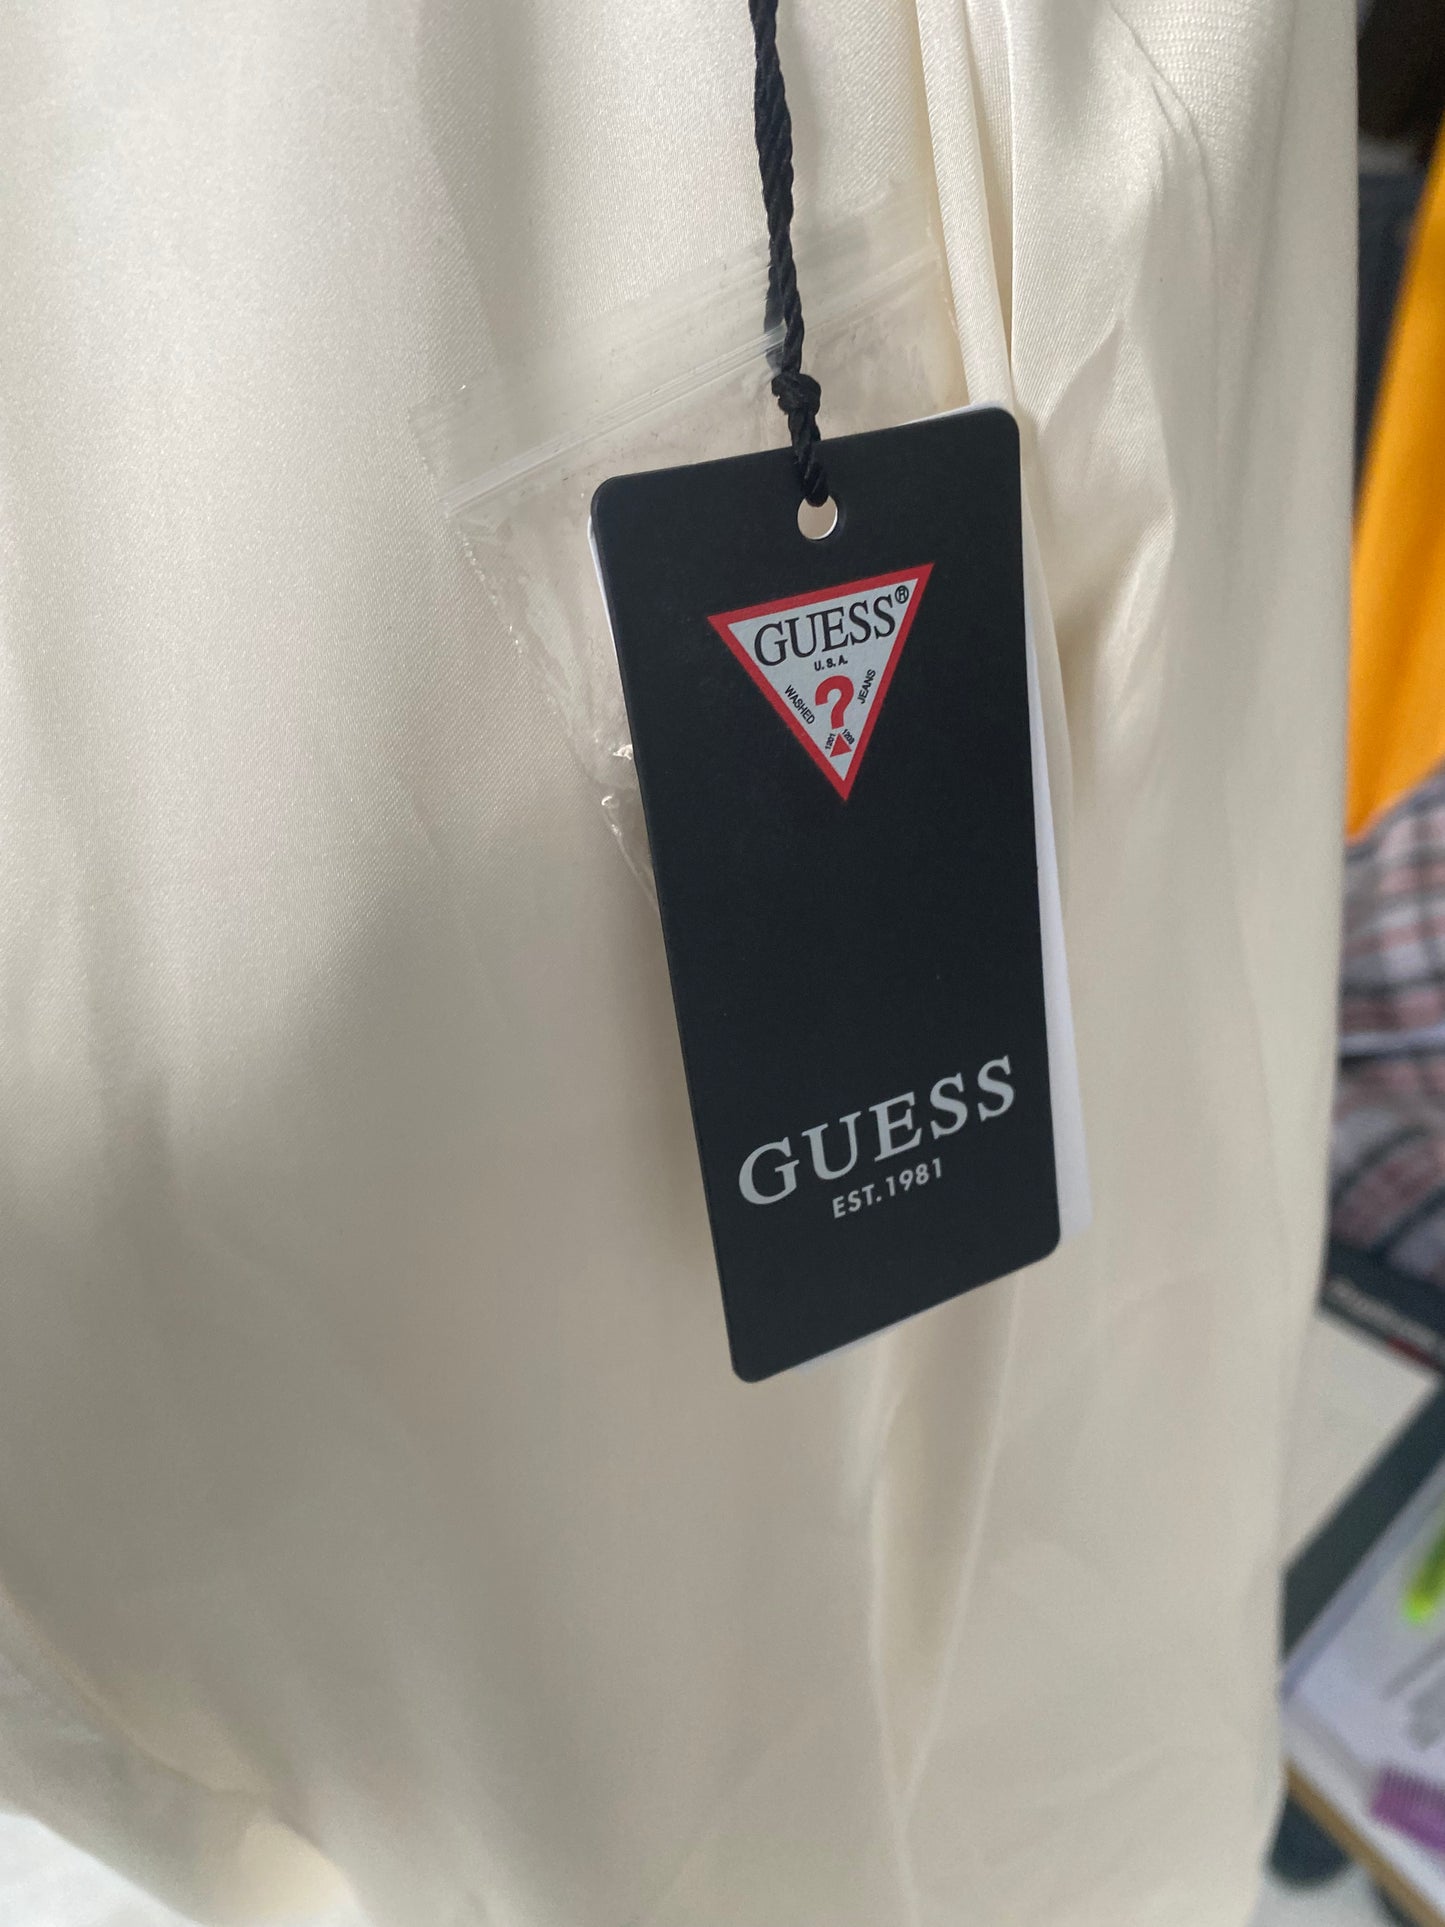 Guess White Blazer Dress Size M New with Tags